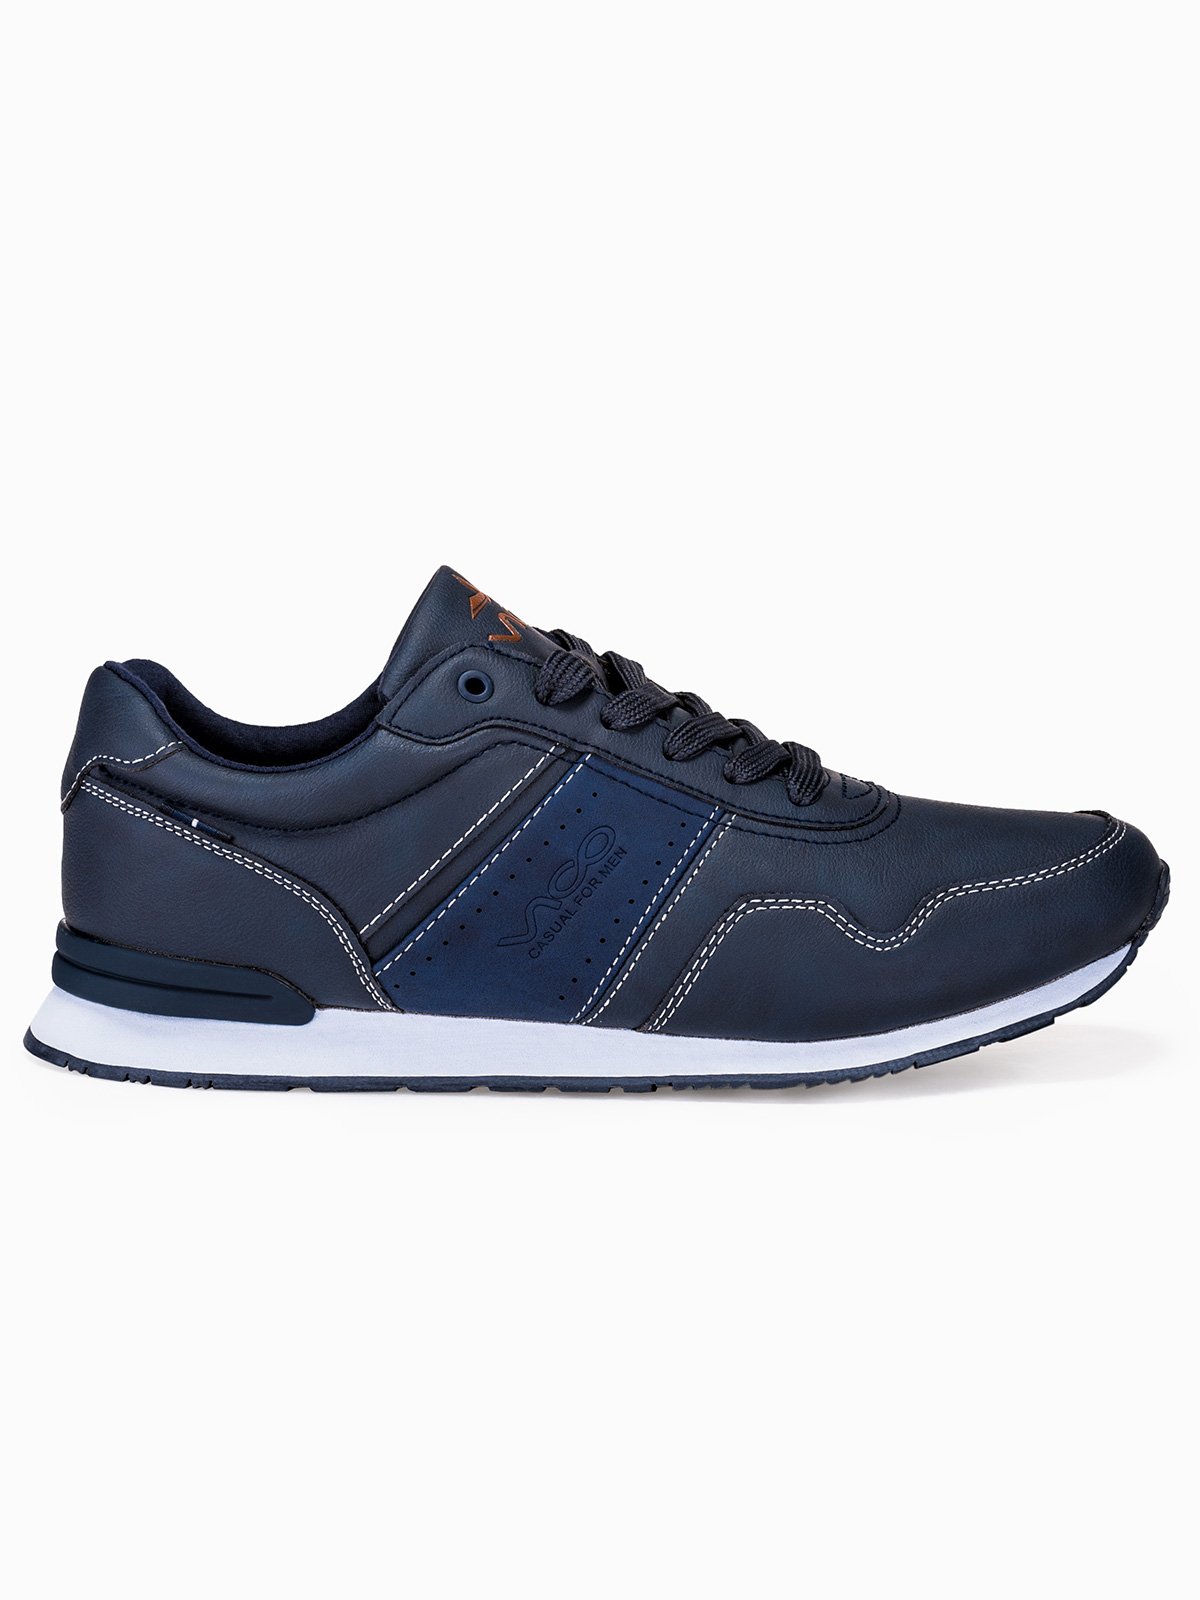 Men's trainers T259 - navy | MODONE wholesale - Clothing For Men